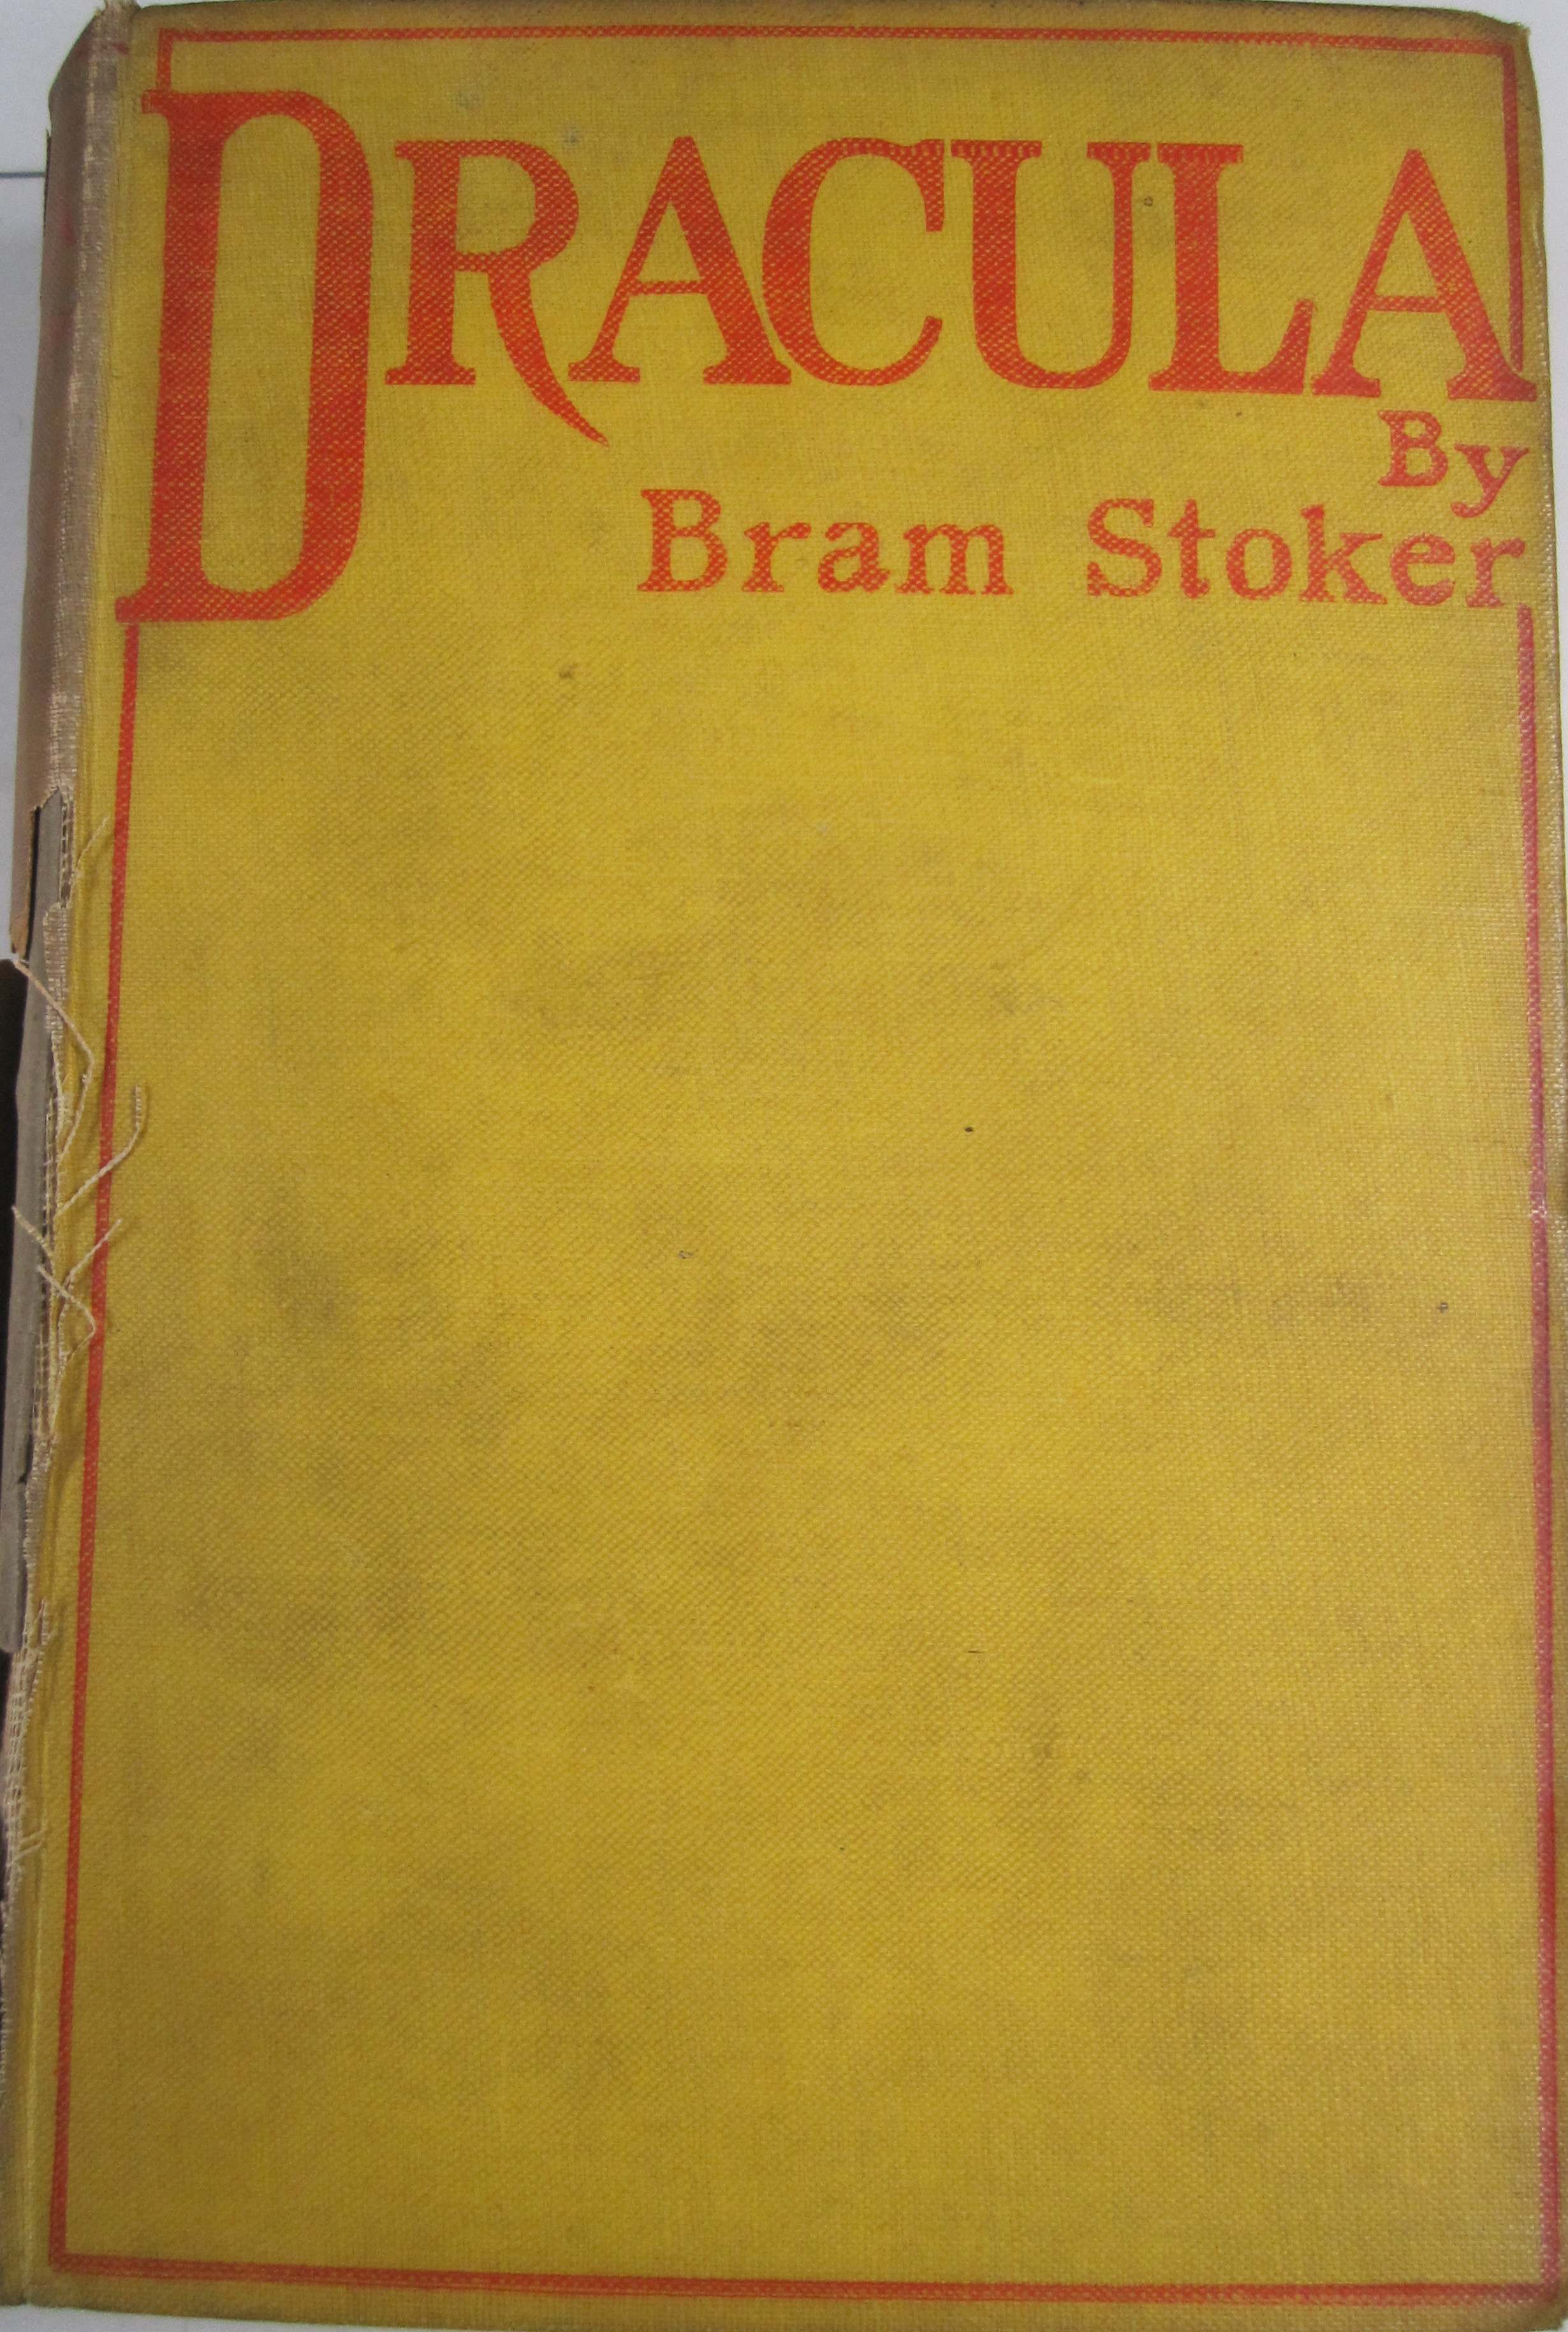 English First Edition published in 1897.